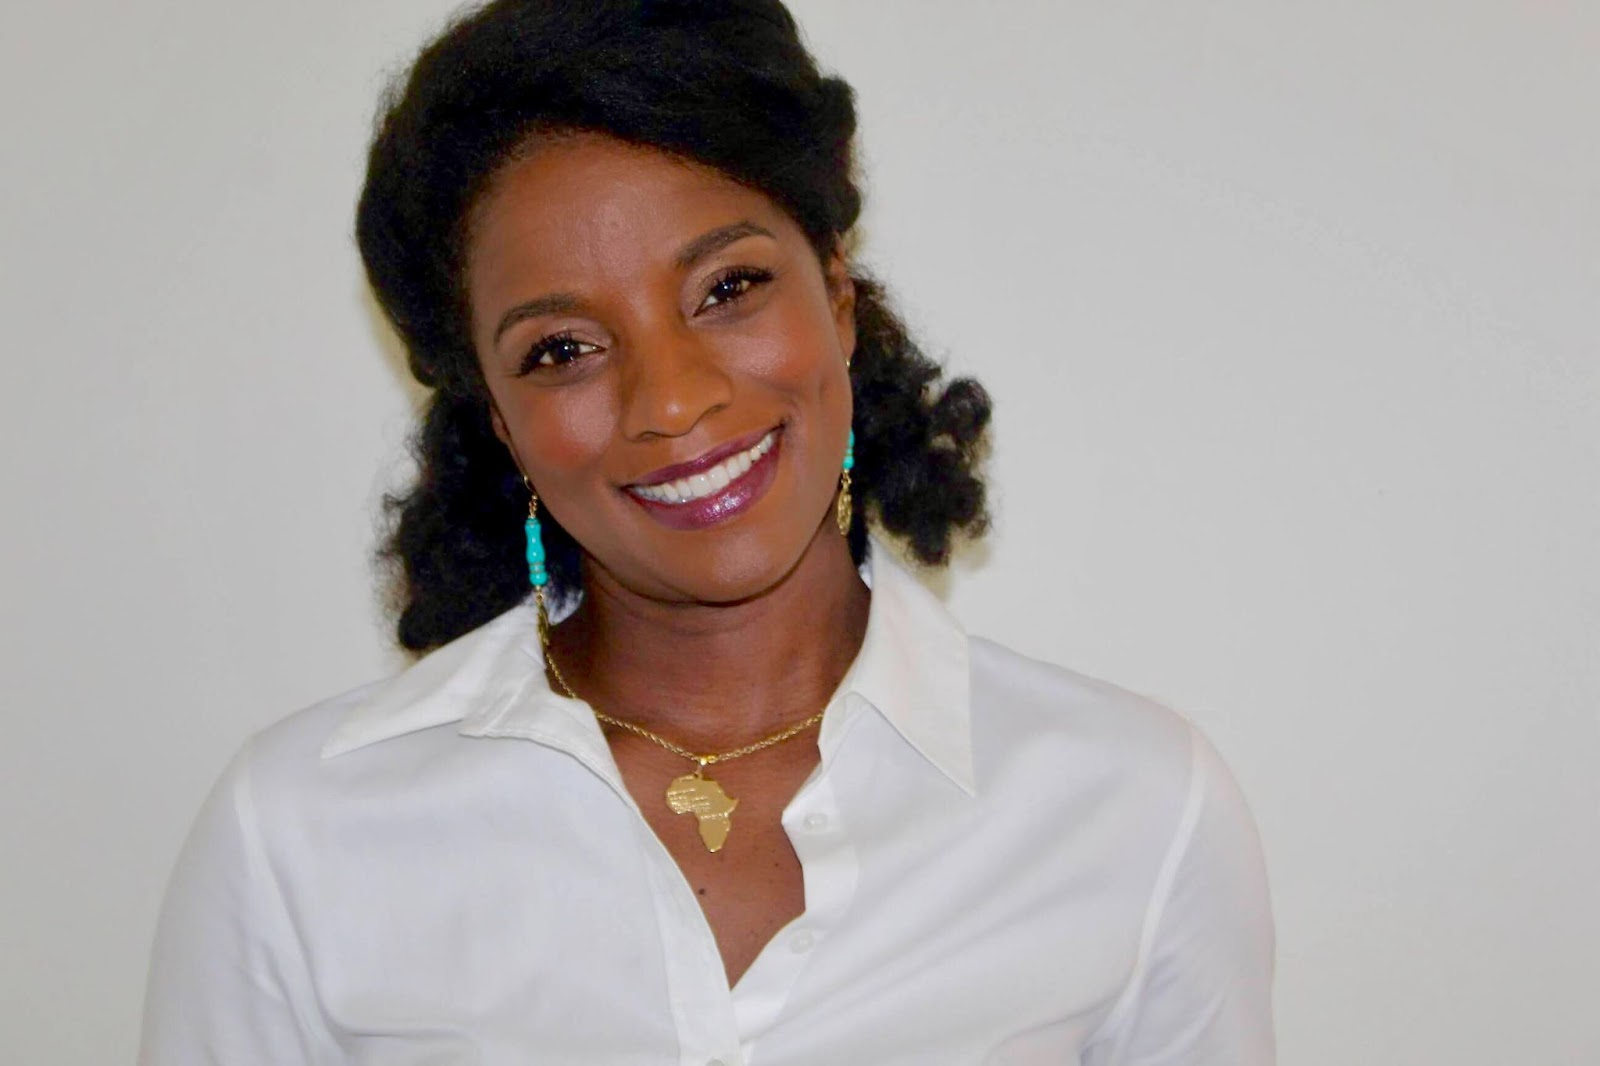 As an associate professor at University of South Carolina Beaufort, Najmah Thomas is committed to providing young people with the tools and opportunities they need to thrive in the world of public policy.